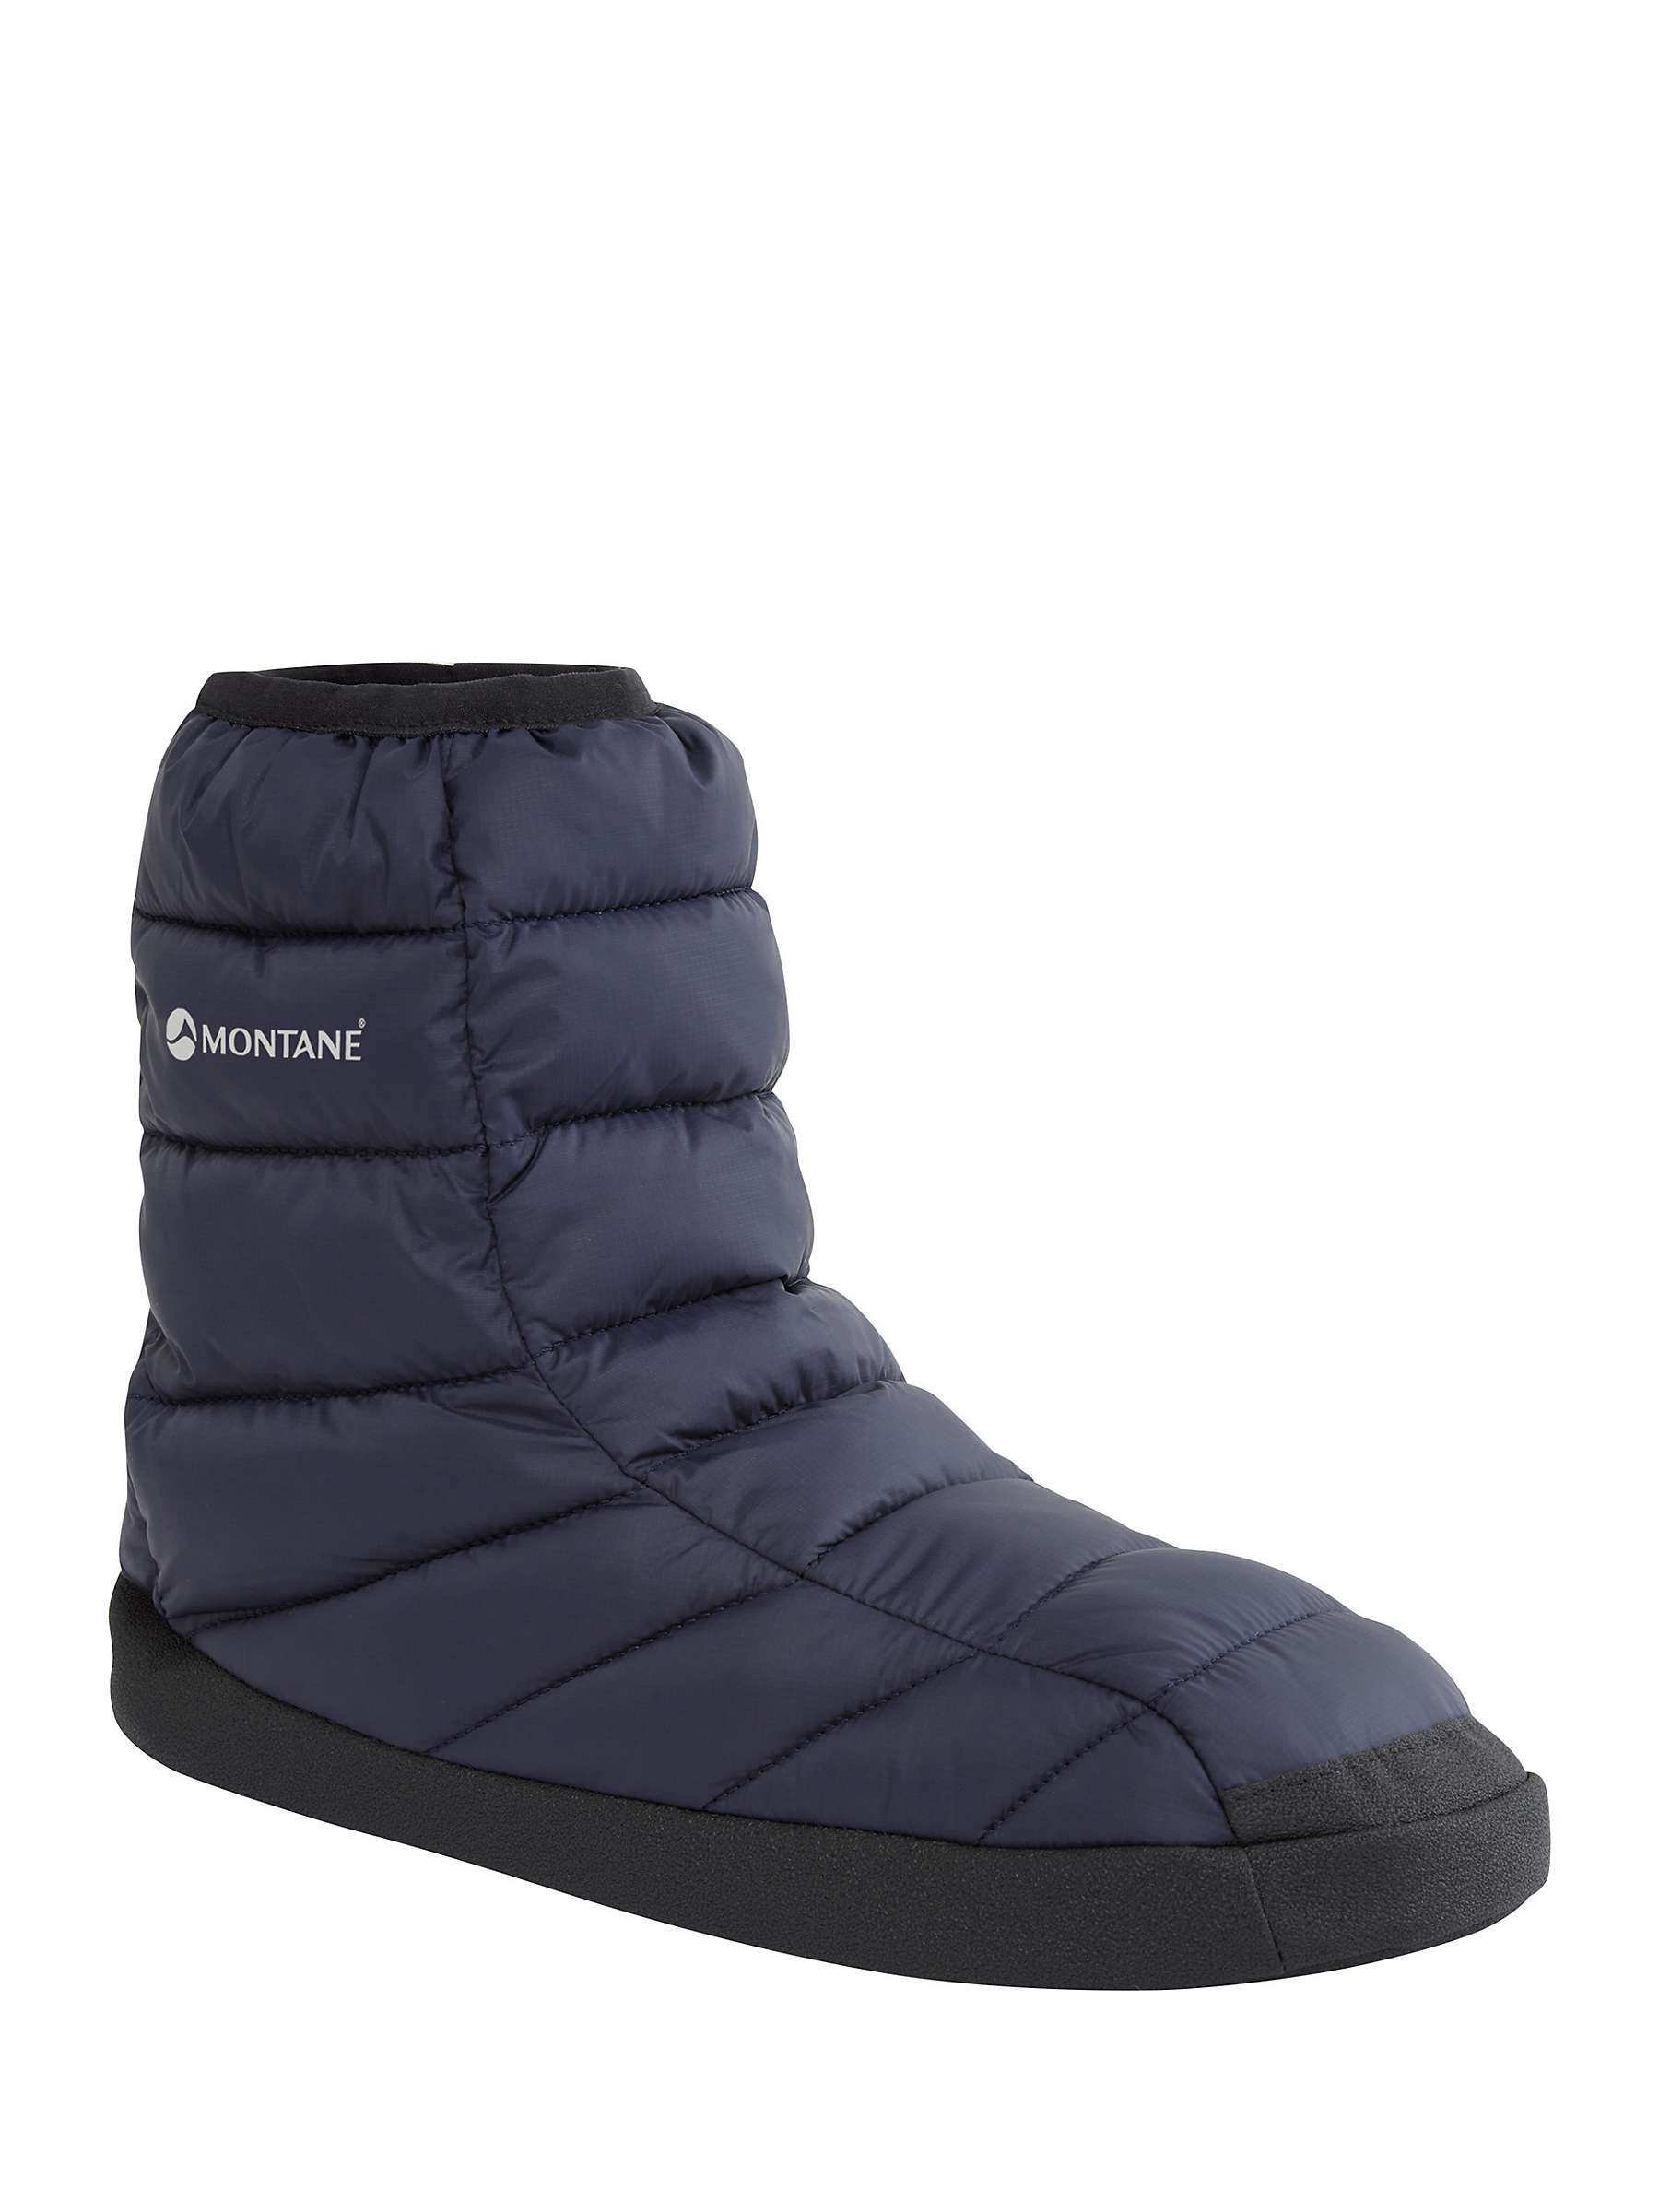 Buy Montane Women's Icarus Hut Recycled Boot Style Slippers Online at johnlewis.com